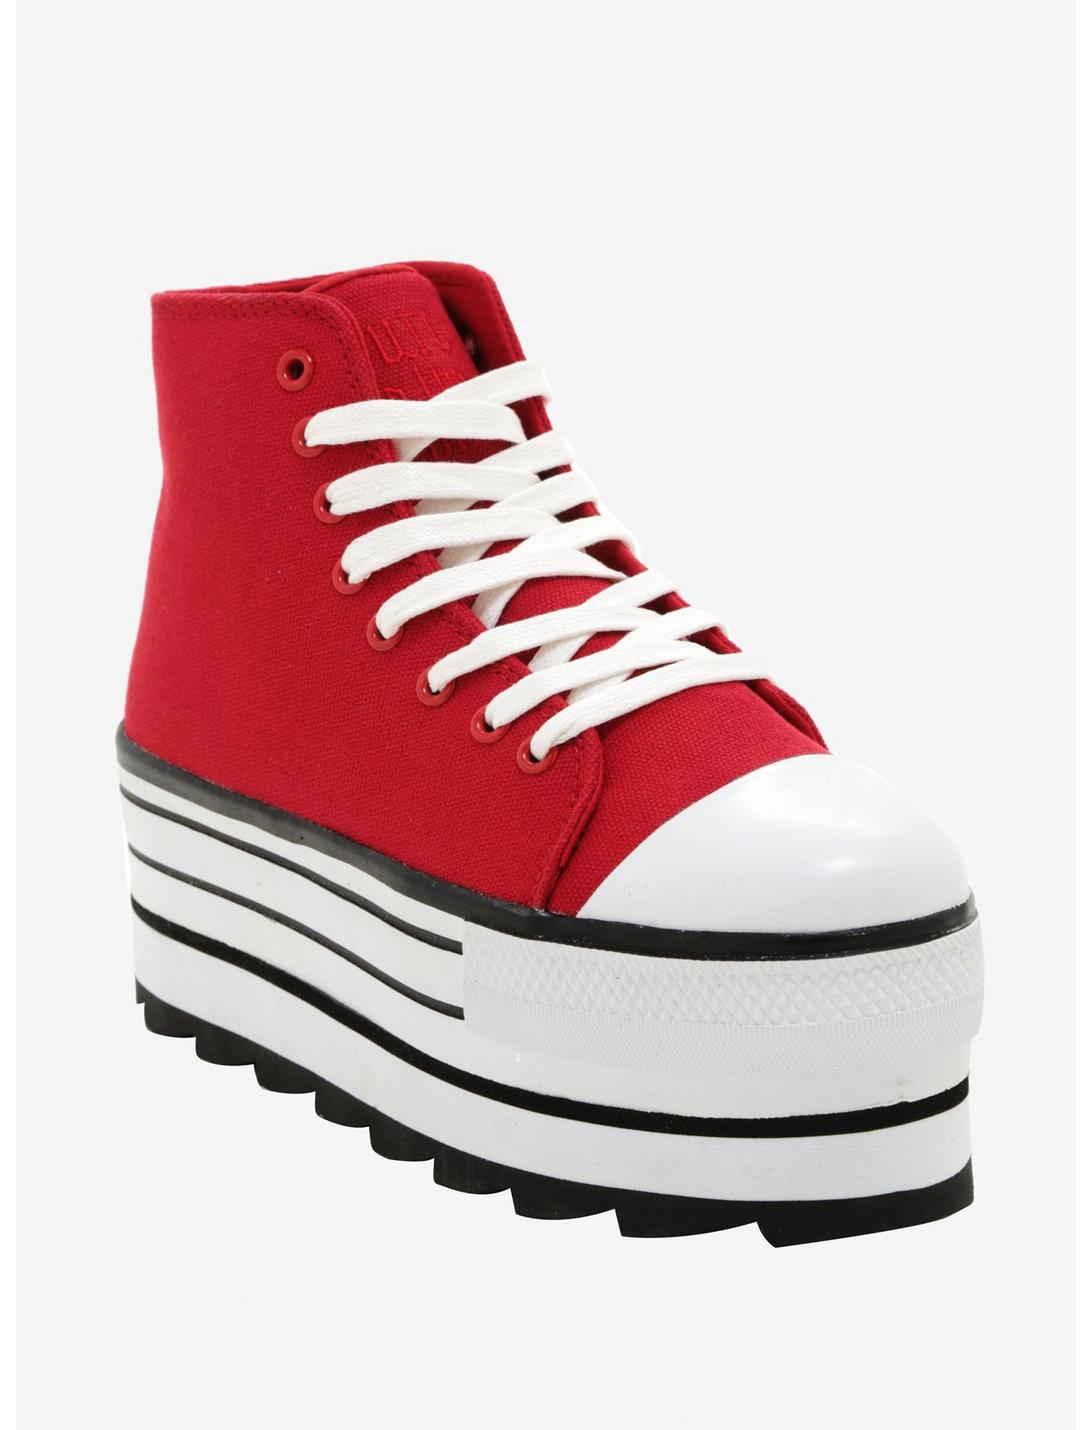 Cute To The Core By YRU Elevation Red Hi-Top Sneakers Hot Topic Exclusive, MULTI, hi-res